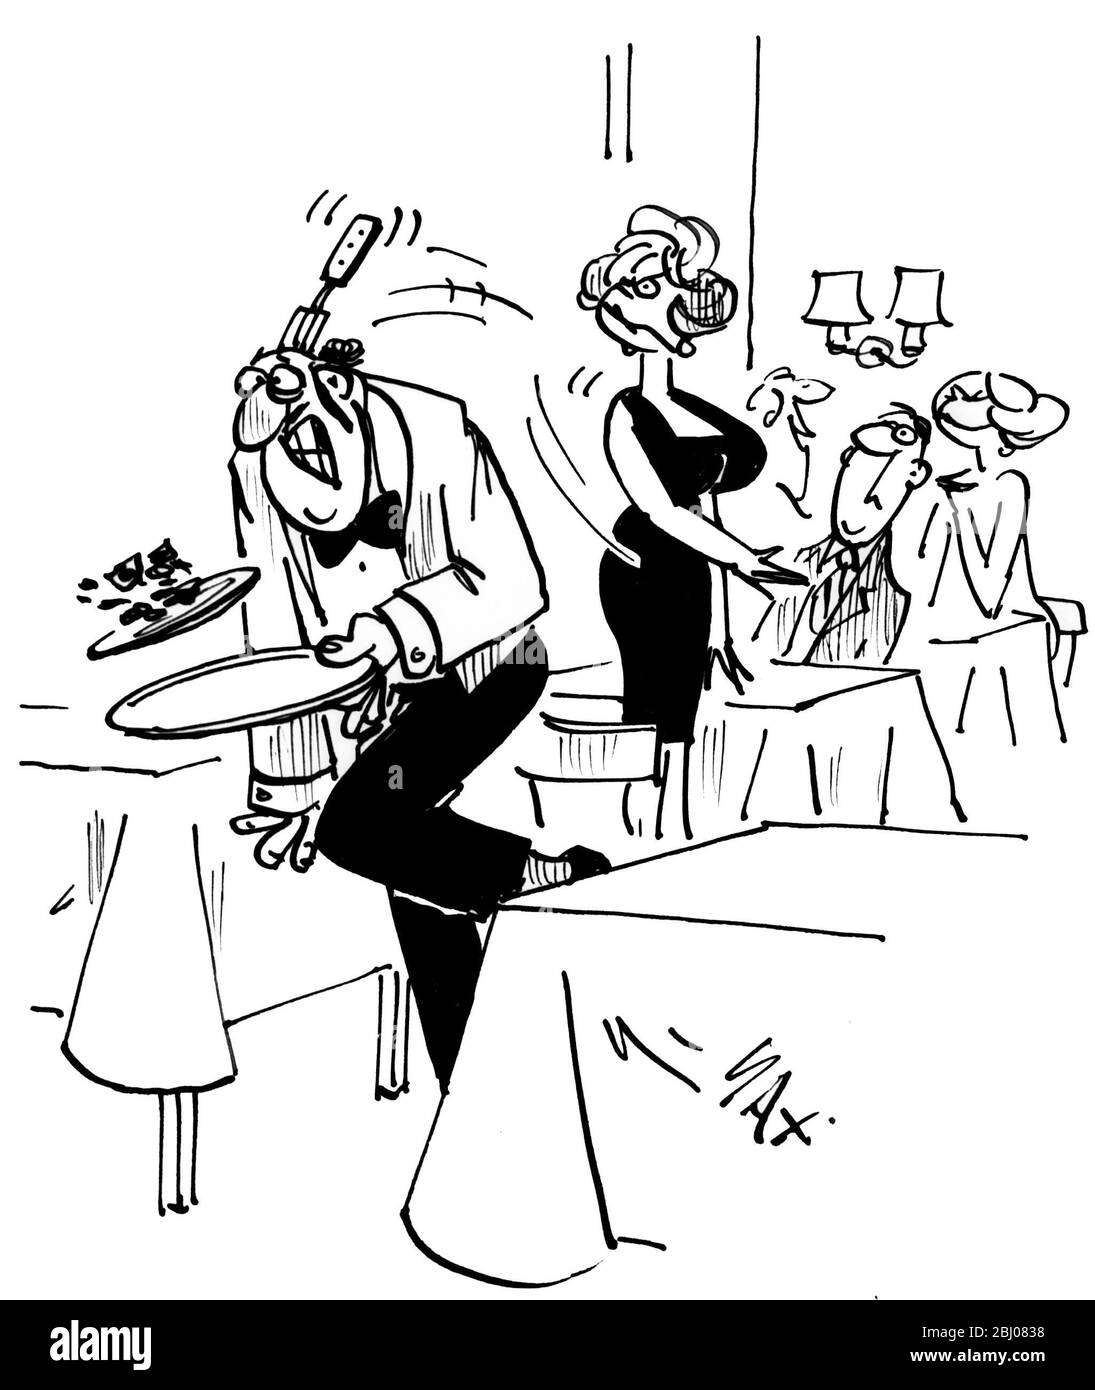 Cartoon by Sax - Waiter brings out the wrong food Stock Photo